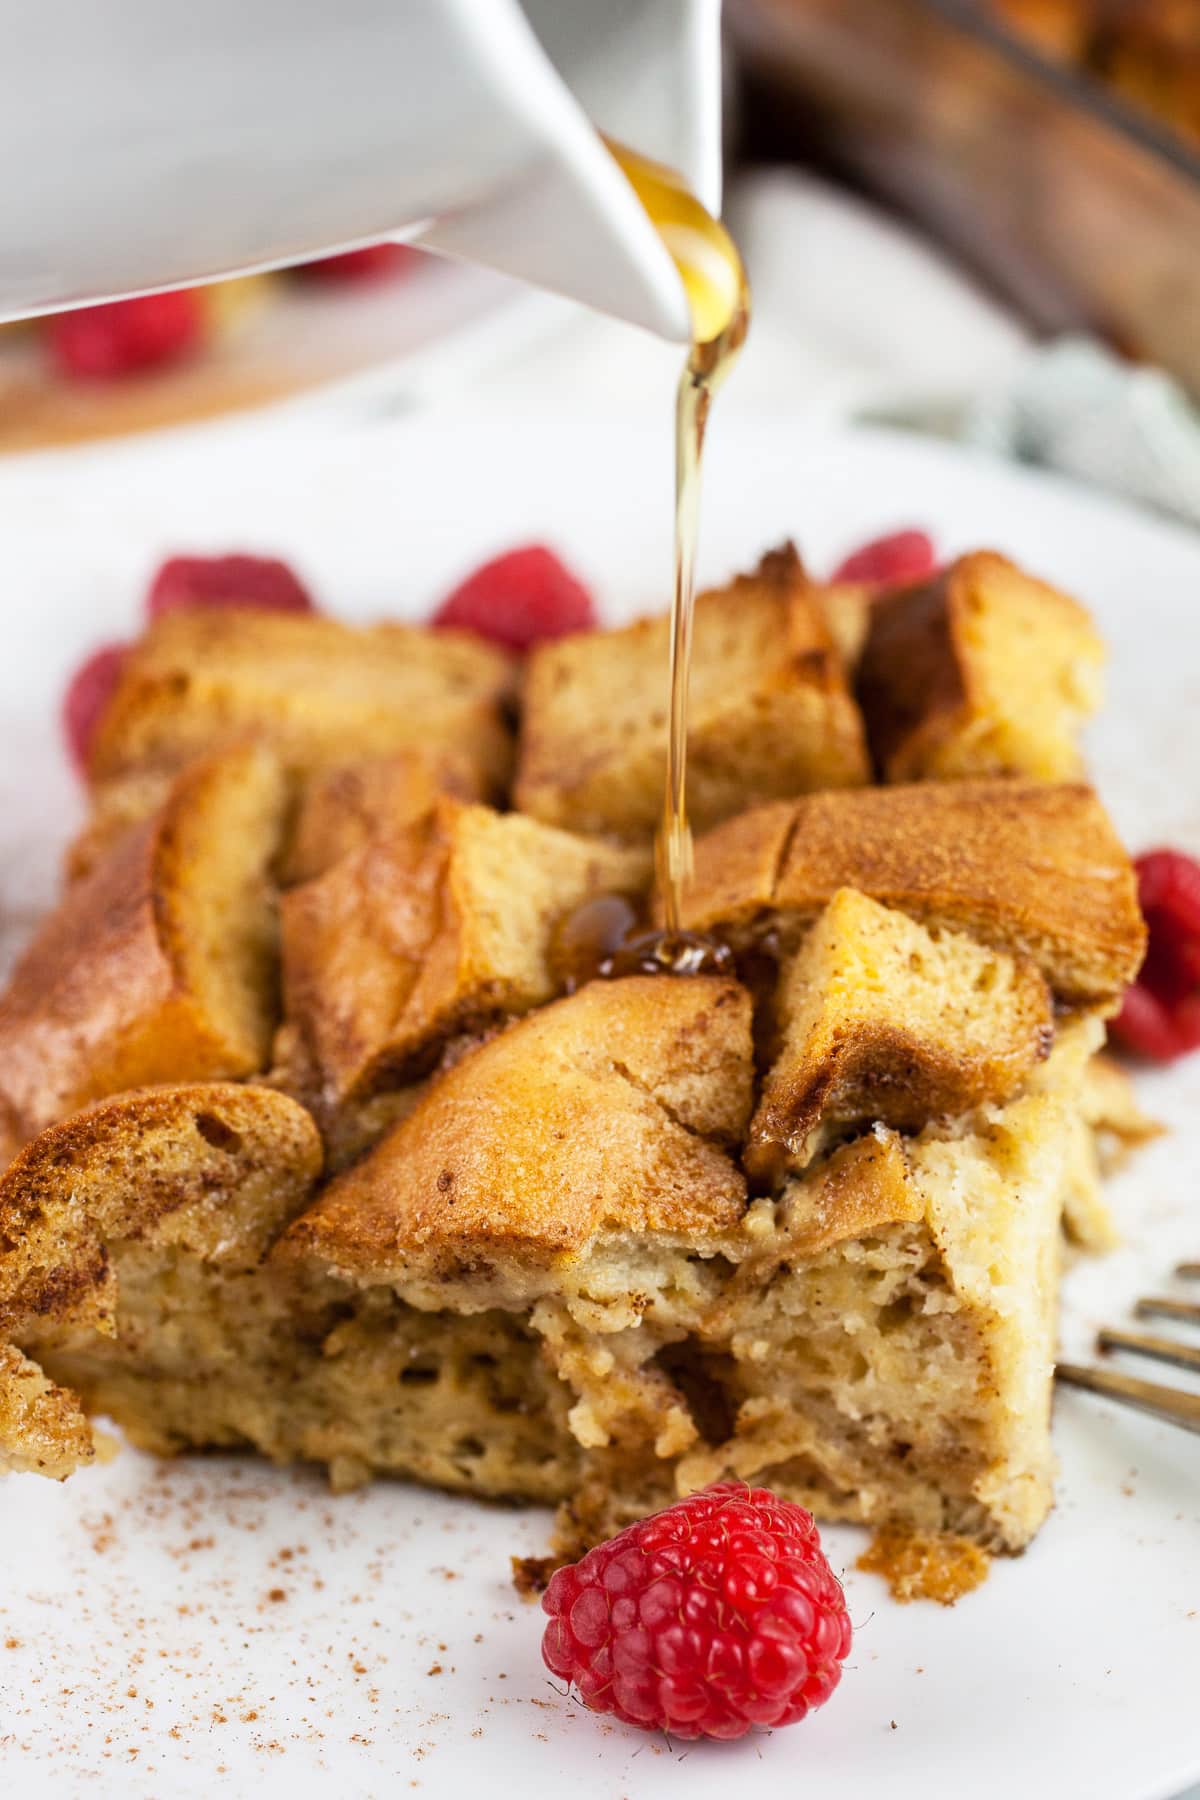 Maple syrup poured onto French toast casserole on white plate with raspberries.